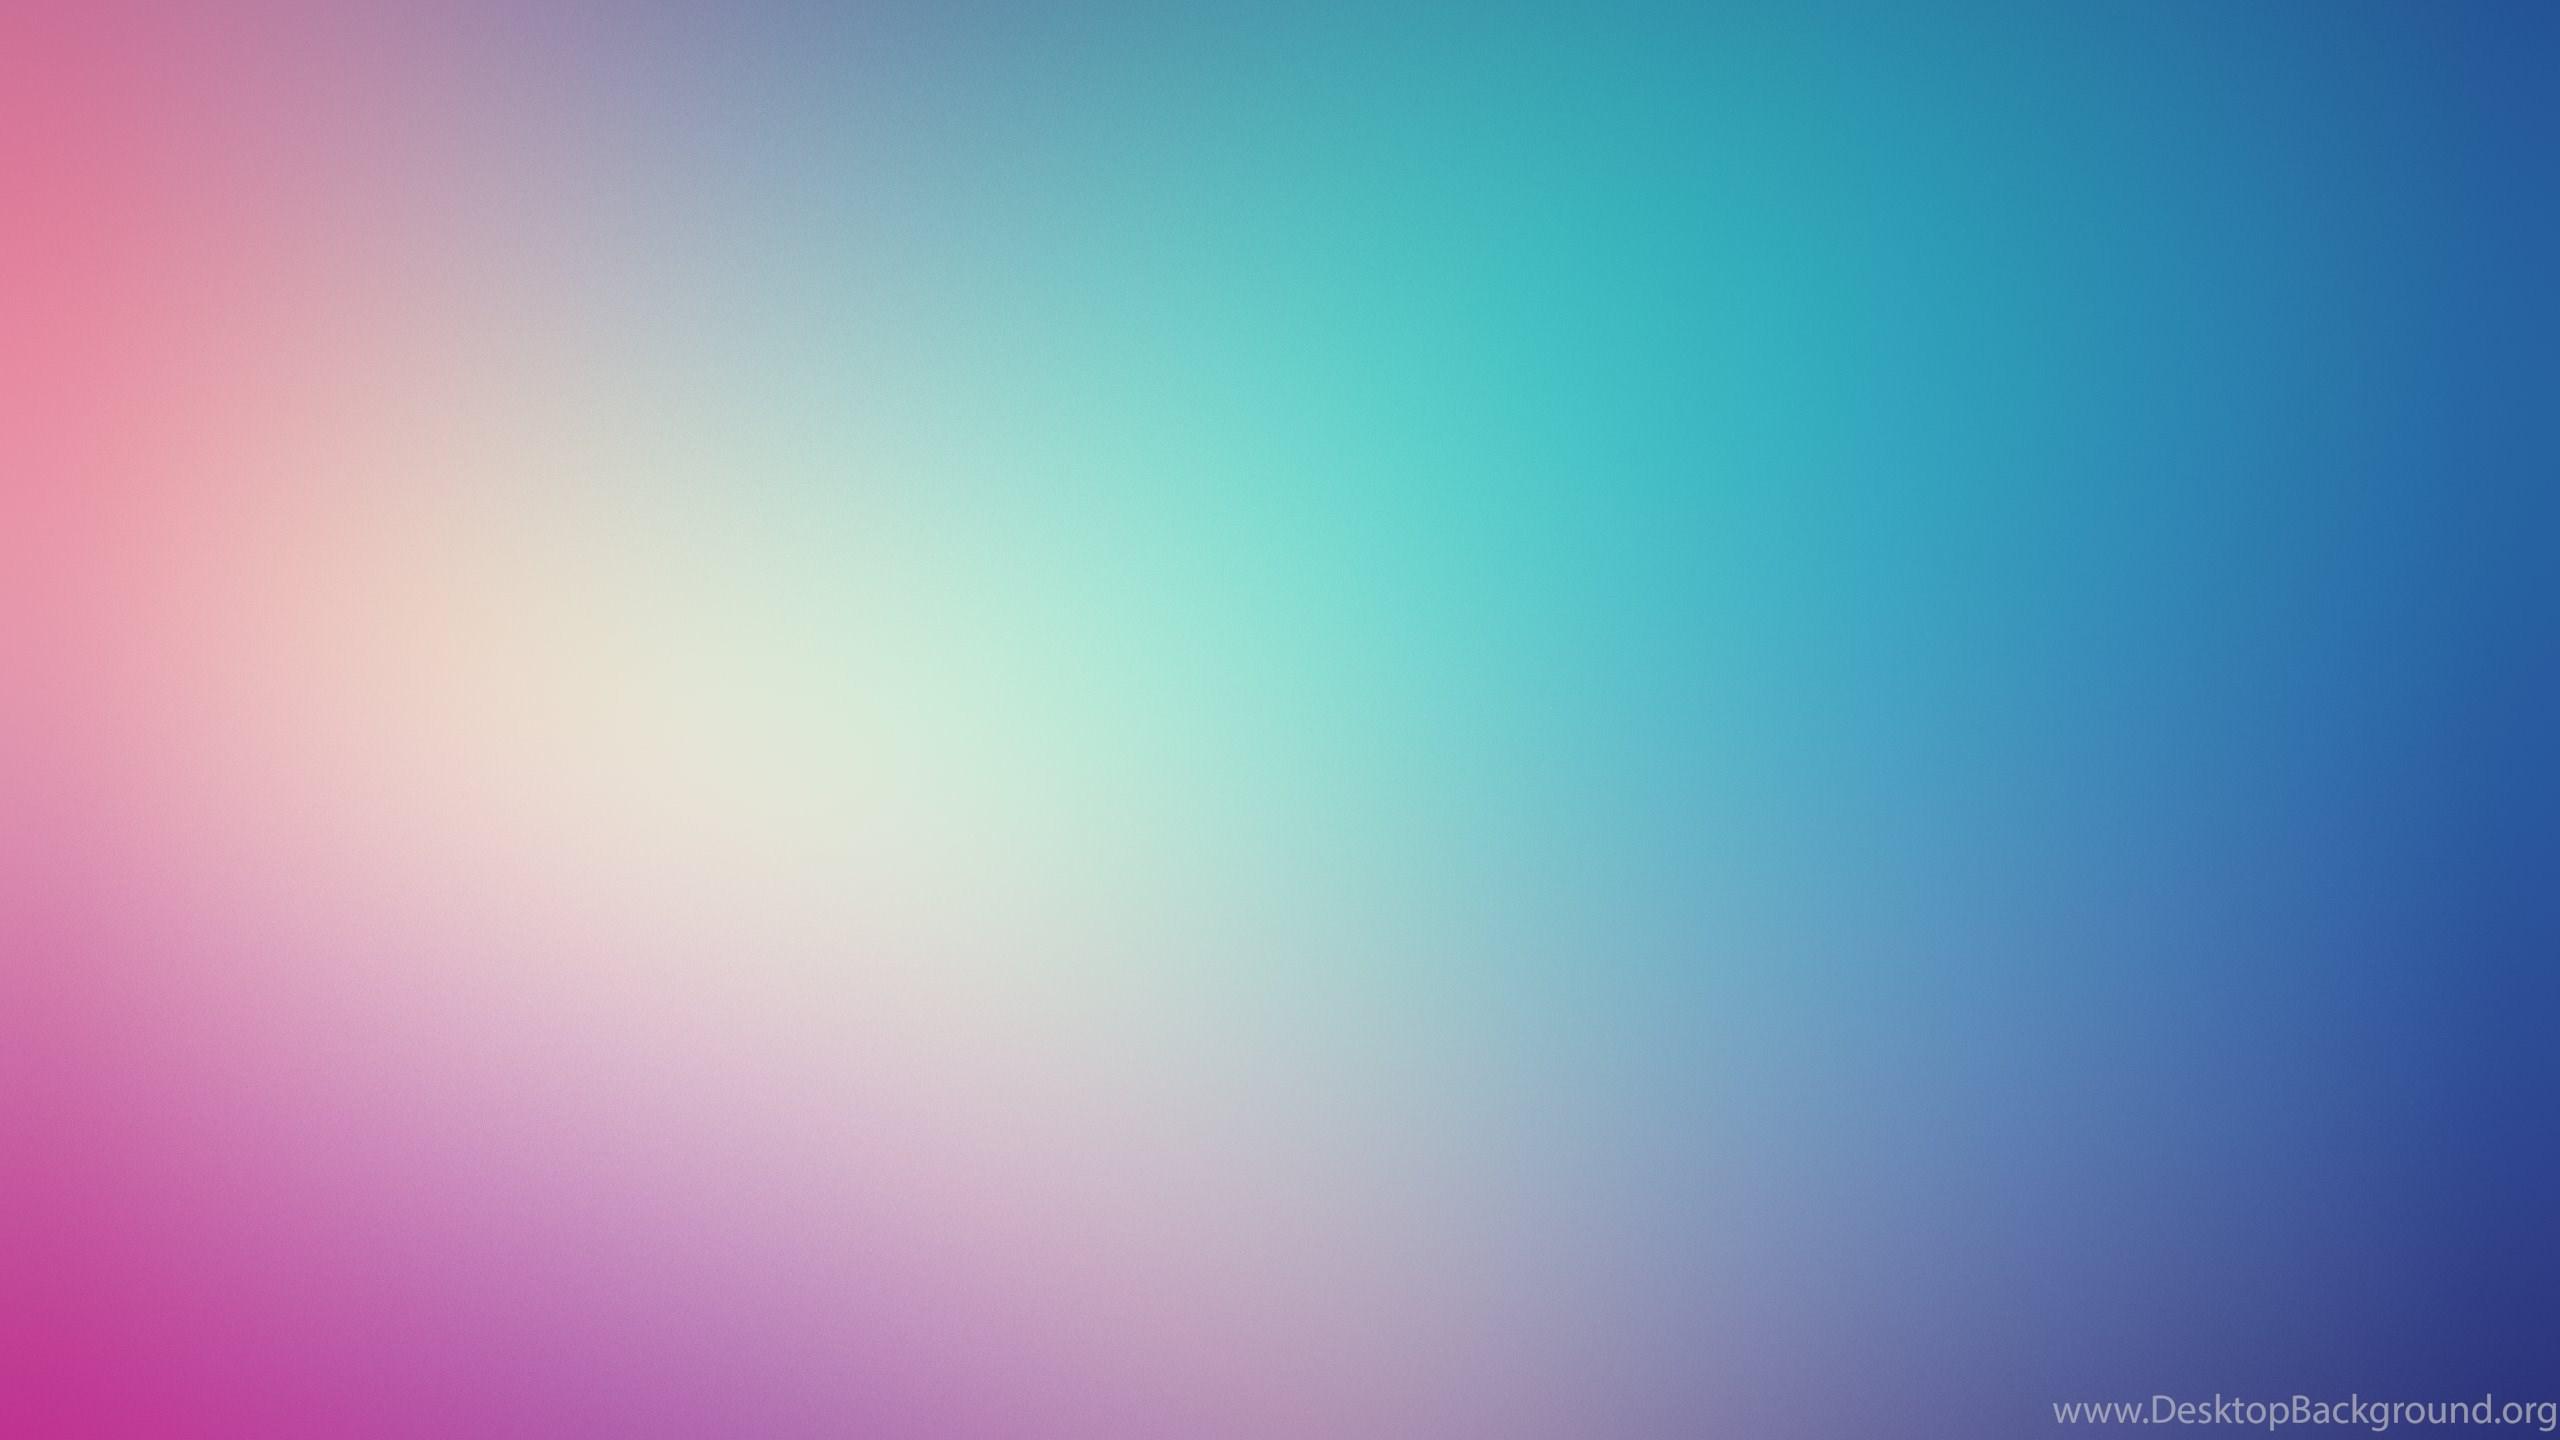 Aura Gradient Background Images  Free Photos PNG Stickers Wallpapers   Backgrounds  rawpixel